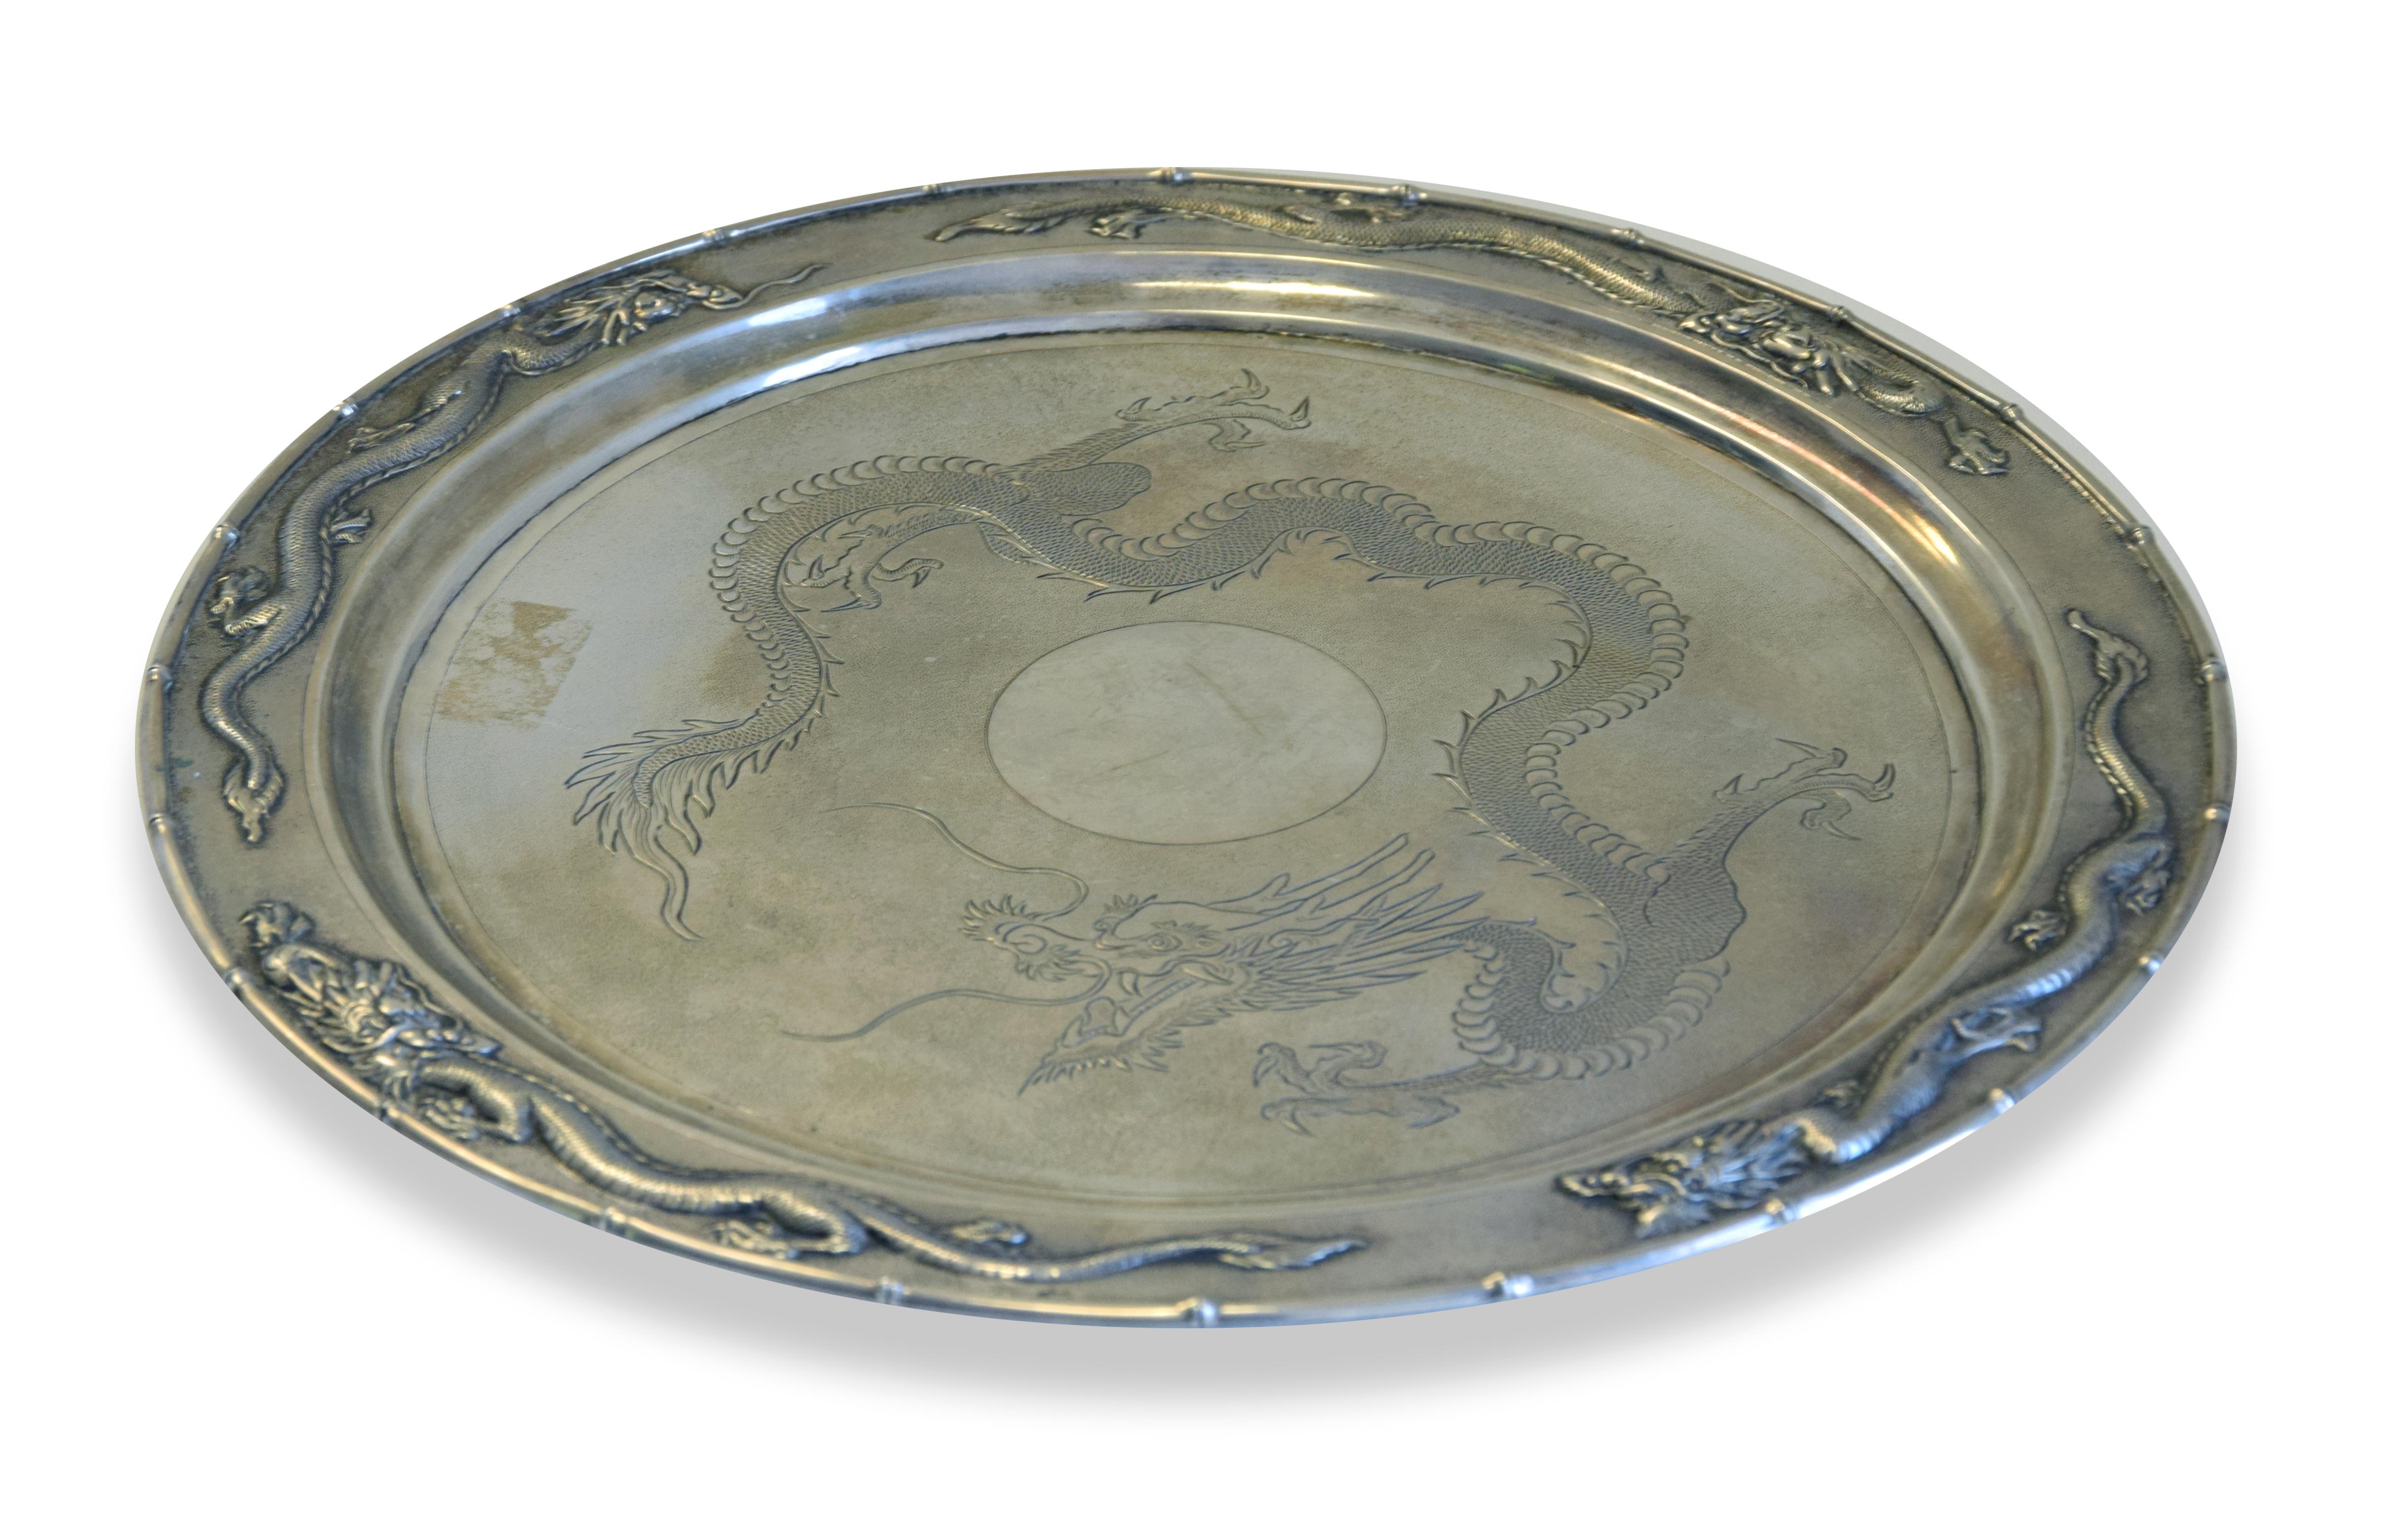 Chinese silver tray is an original decorative object realized in China between 1870 and 1930.

Original silver object.

Hallmark Shangai, silversmith QI CHANG 其昌

Titled 800/1000.

Ø 35 cm 

Mint conditions.

Precious Antique silver tray made by QI